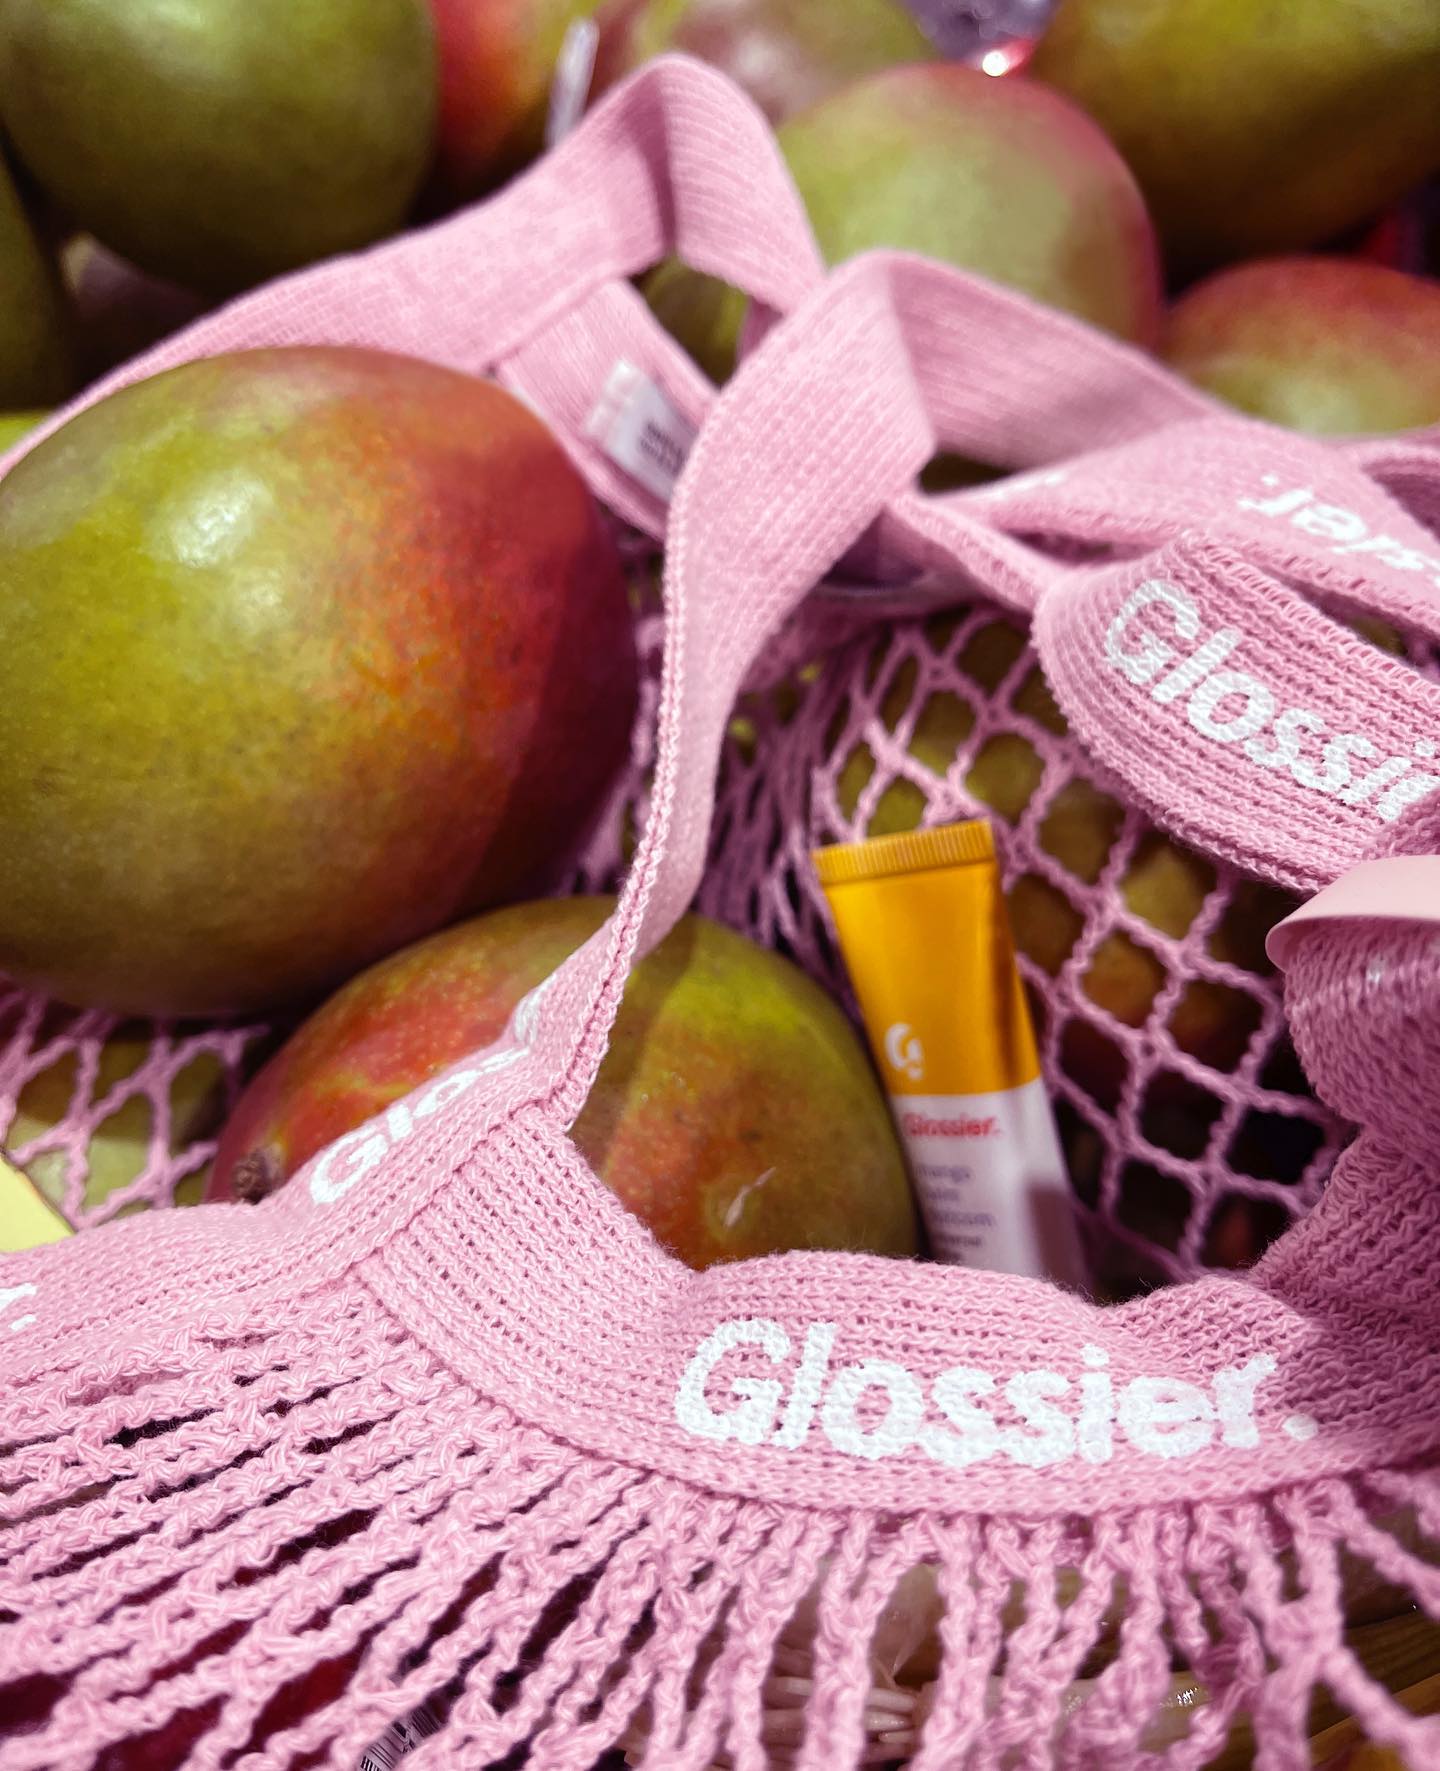 Mangos and Glossier lip products lay in a light pink Glossier fruit bag.